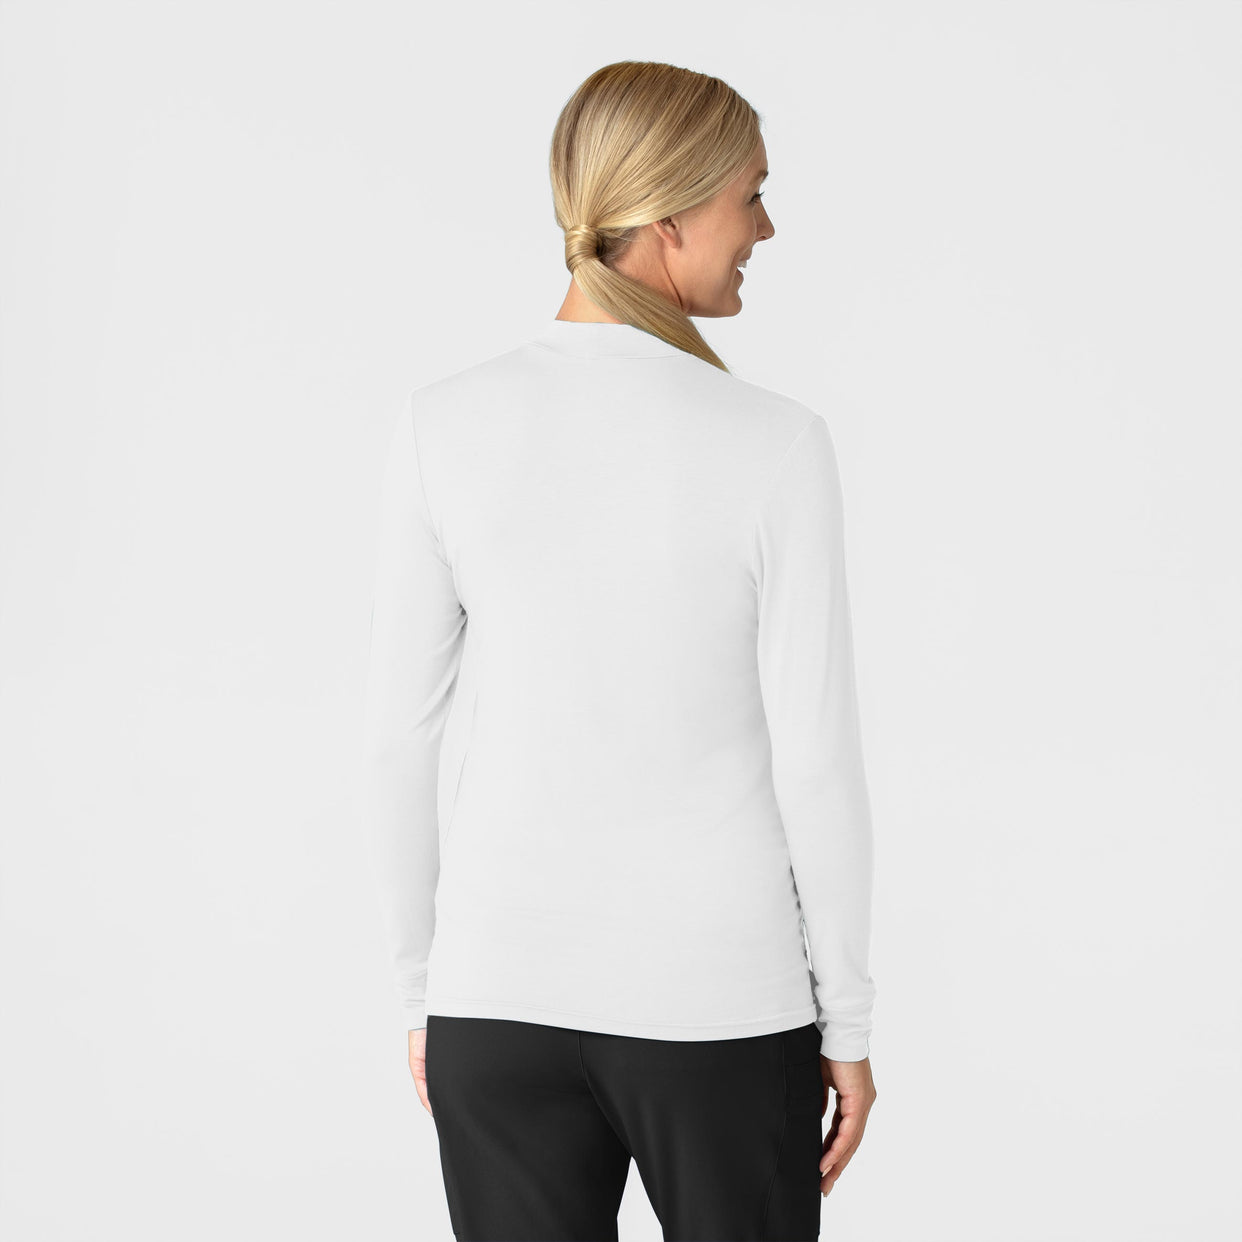 Knits and Layers Women’s Long Sleeve Mock Neck Silky Tee White back view